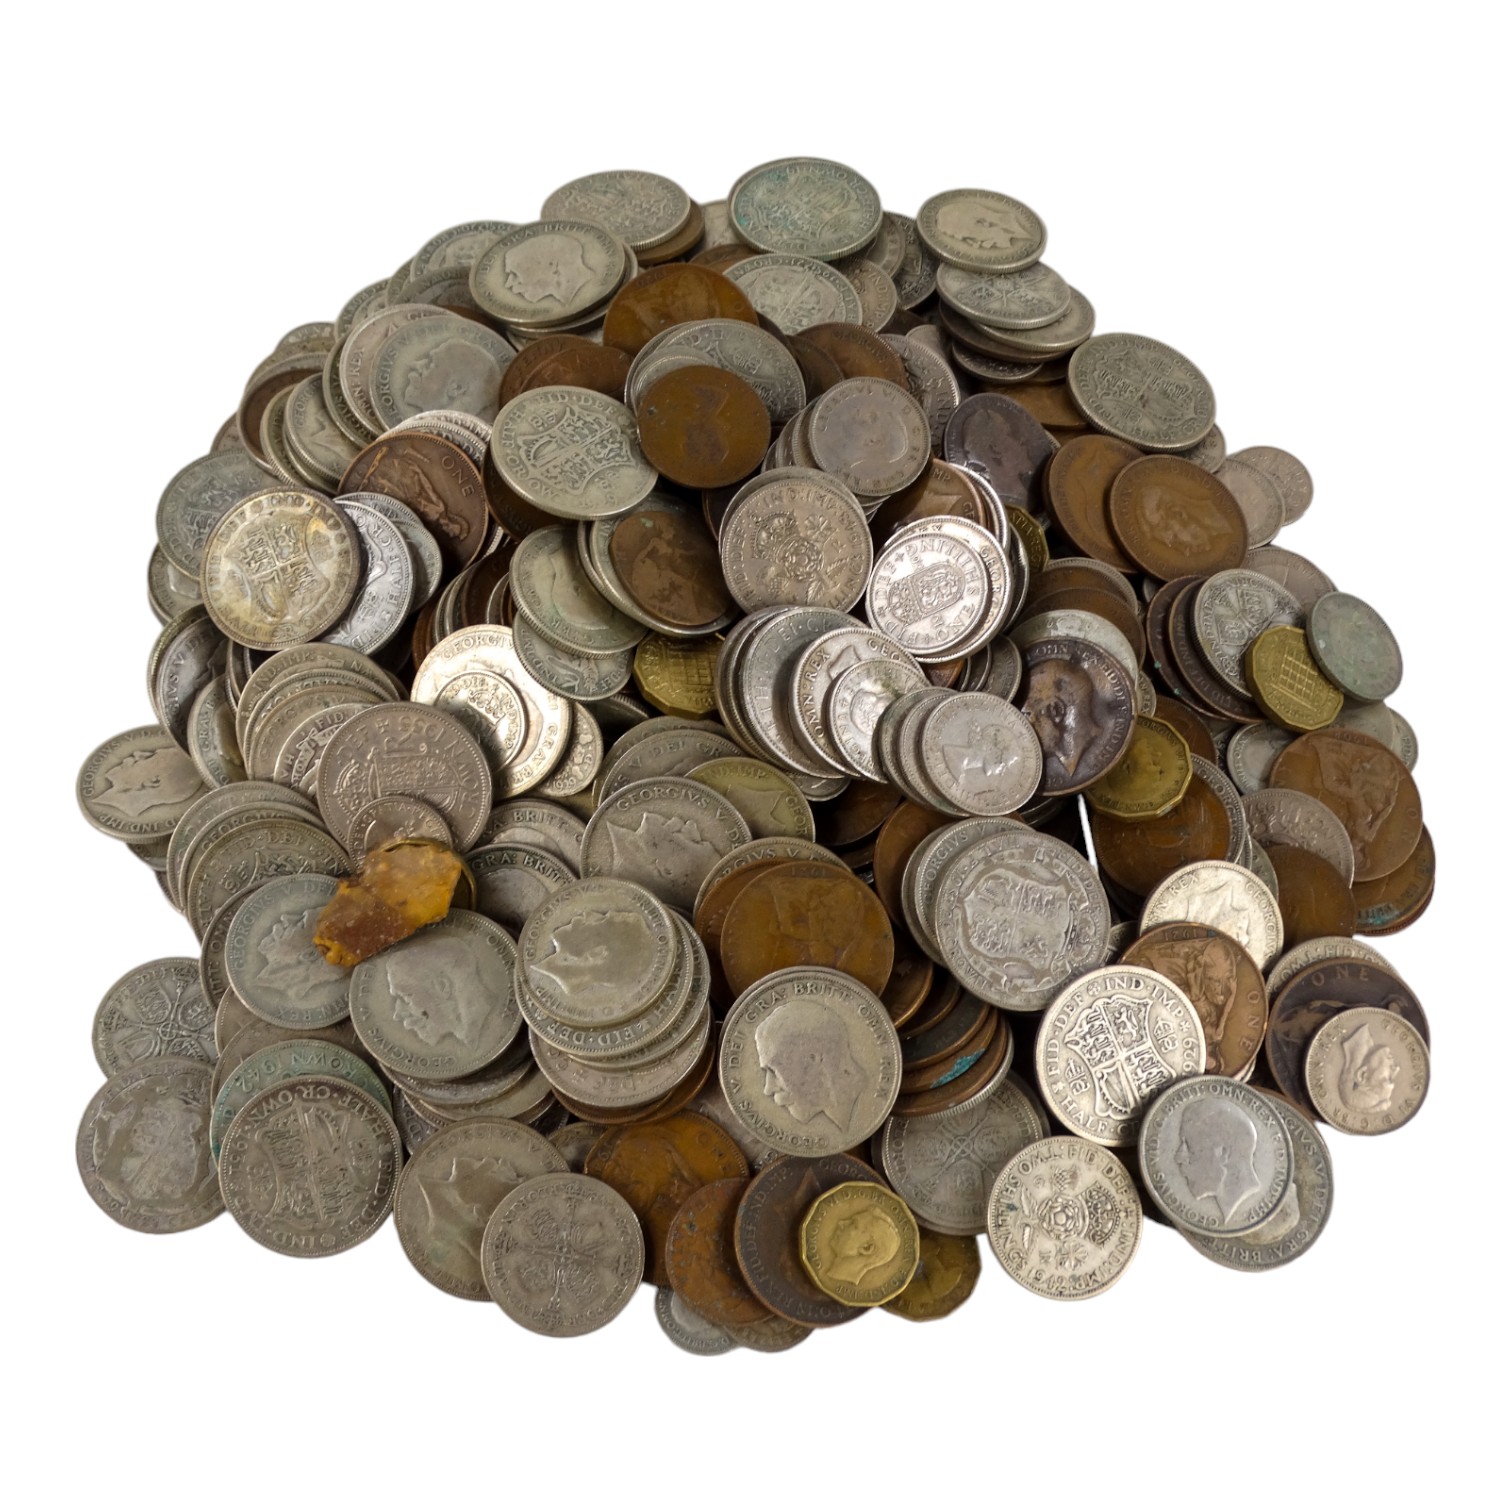 A quantity of UK coinage - mostly second quarter of the 20th century.